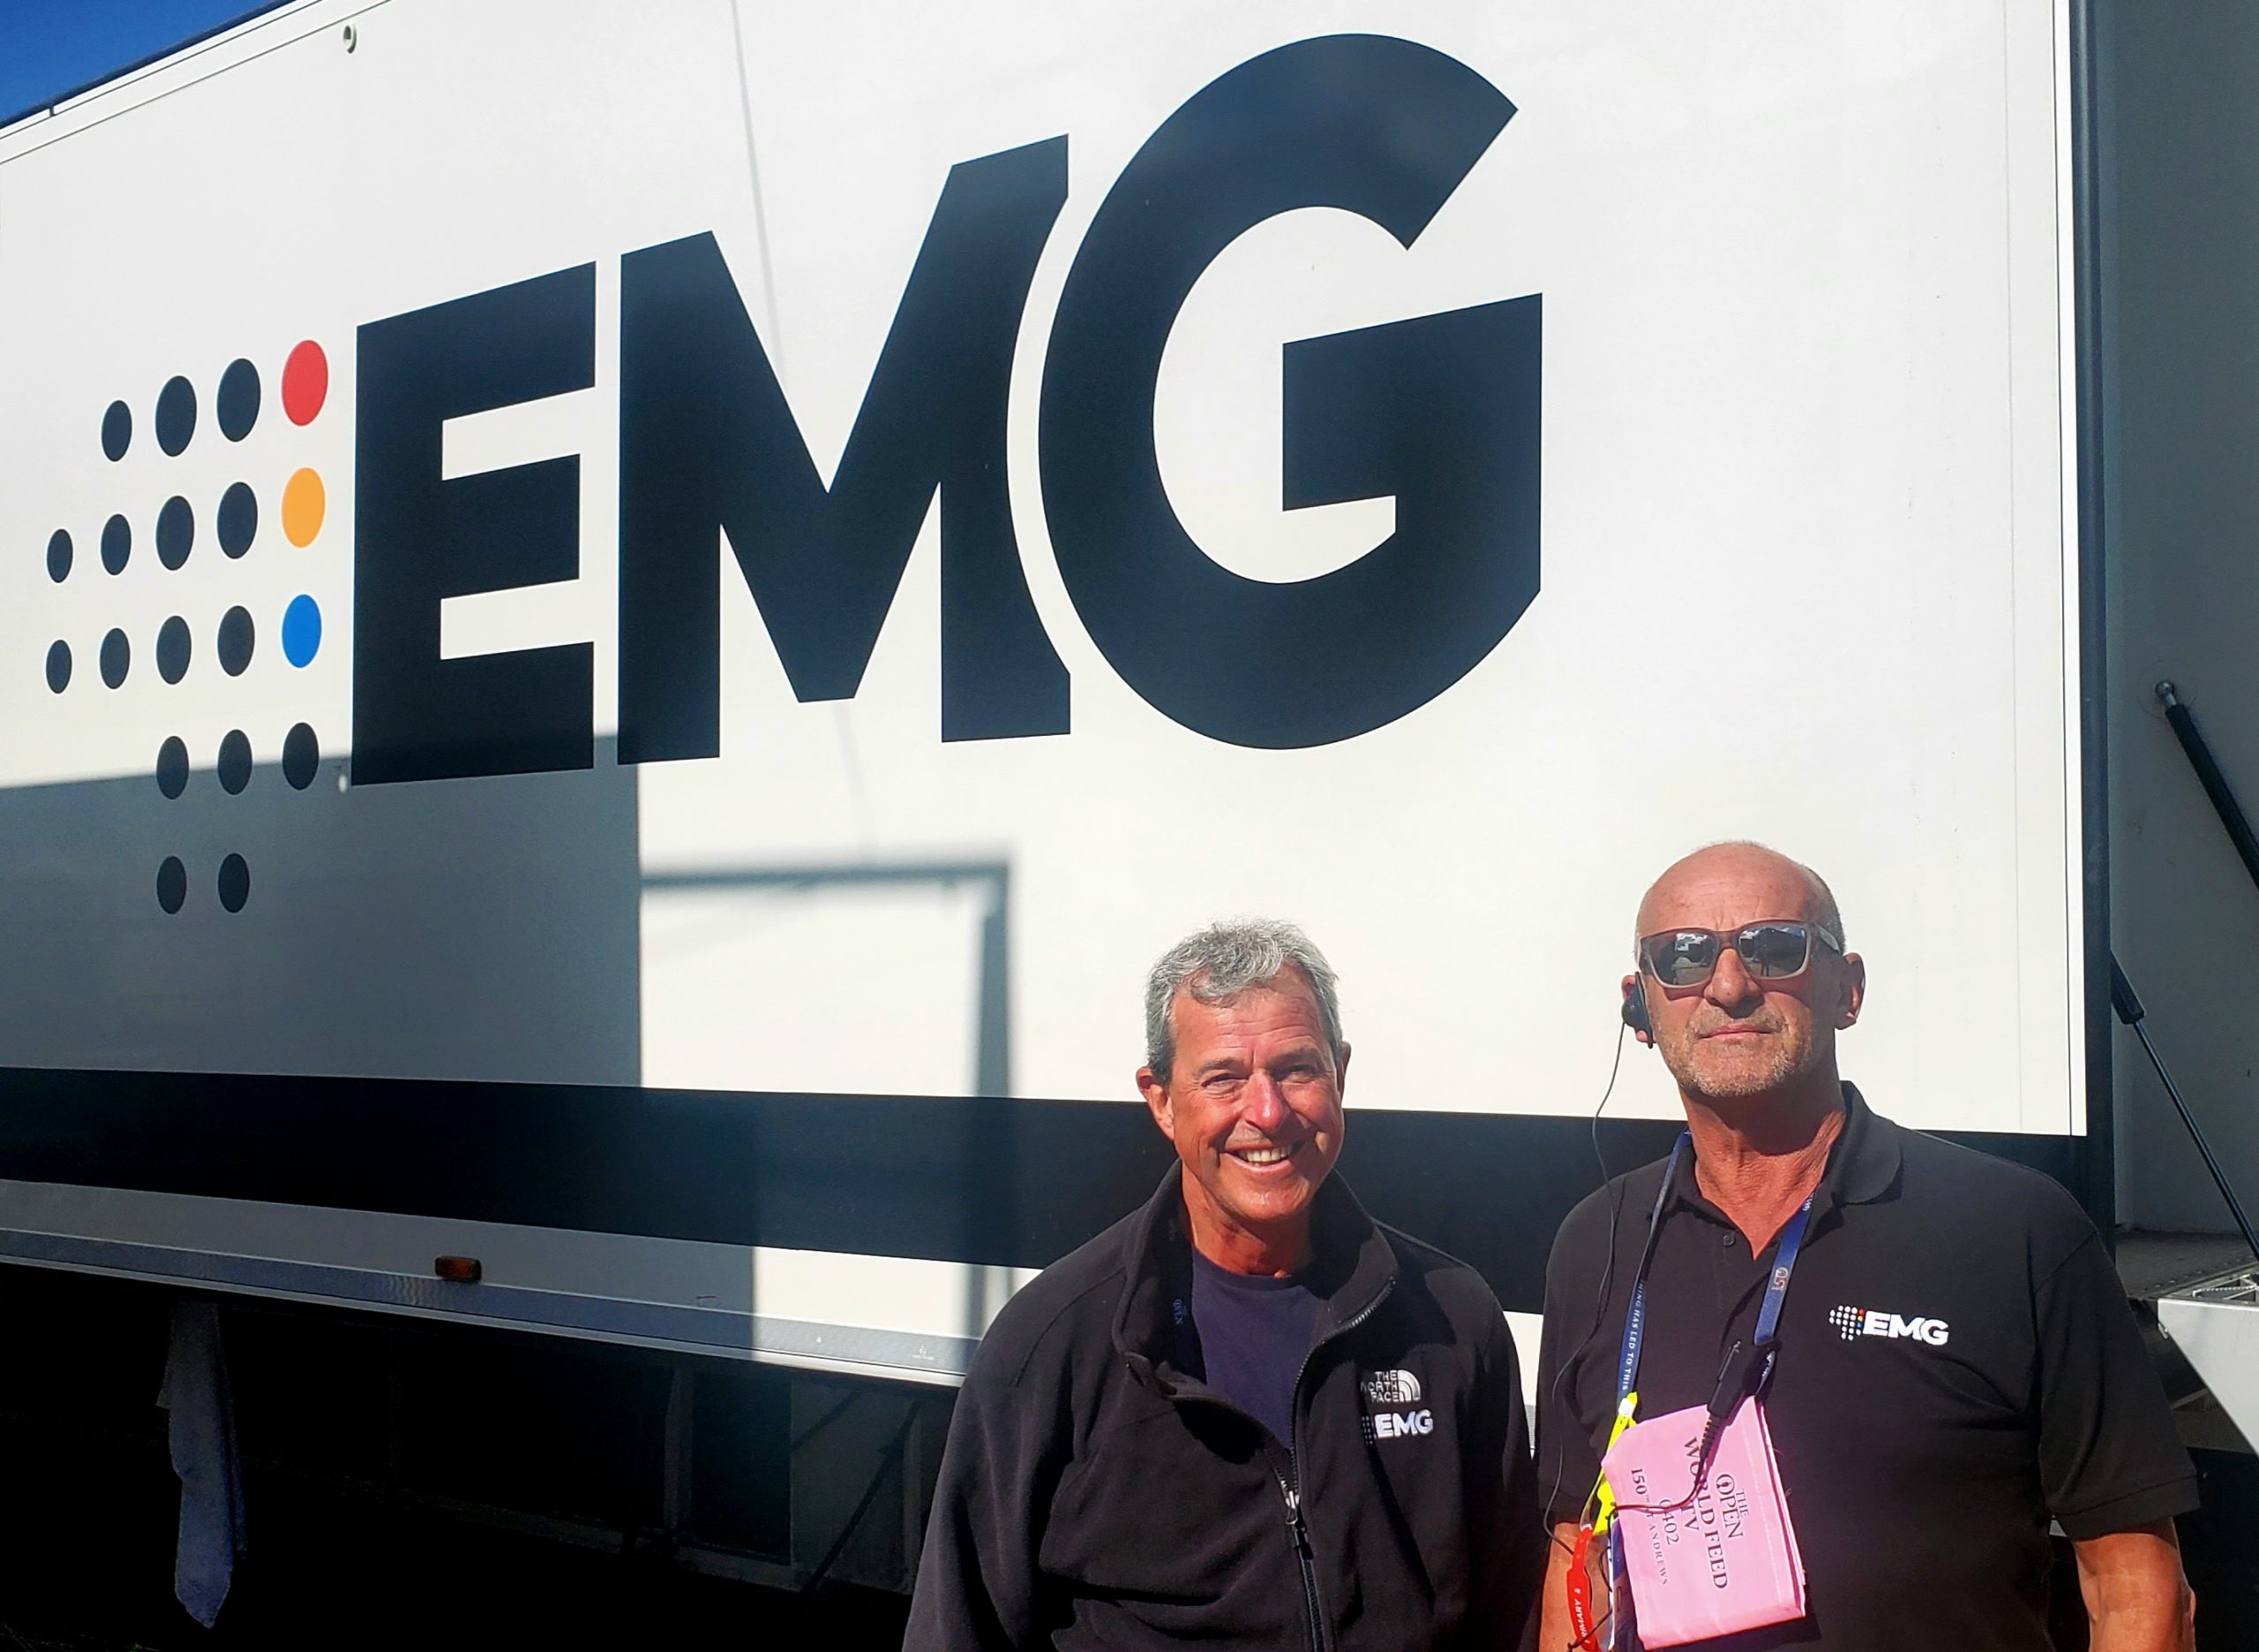 Live From The Open Championship EMG UK Efforts Power World Feed, Unilateral Rightsholder Operations